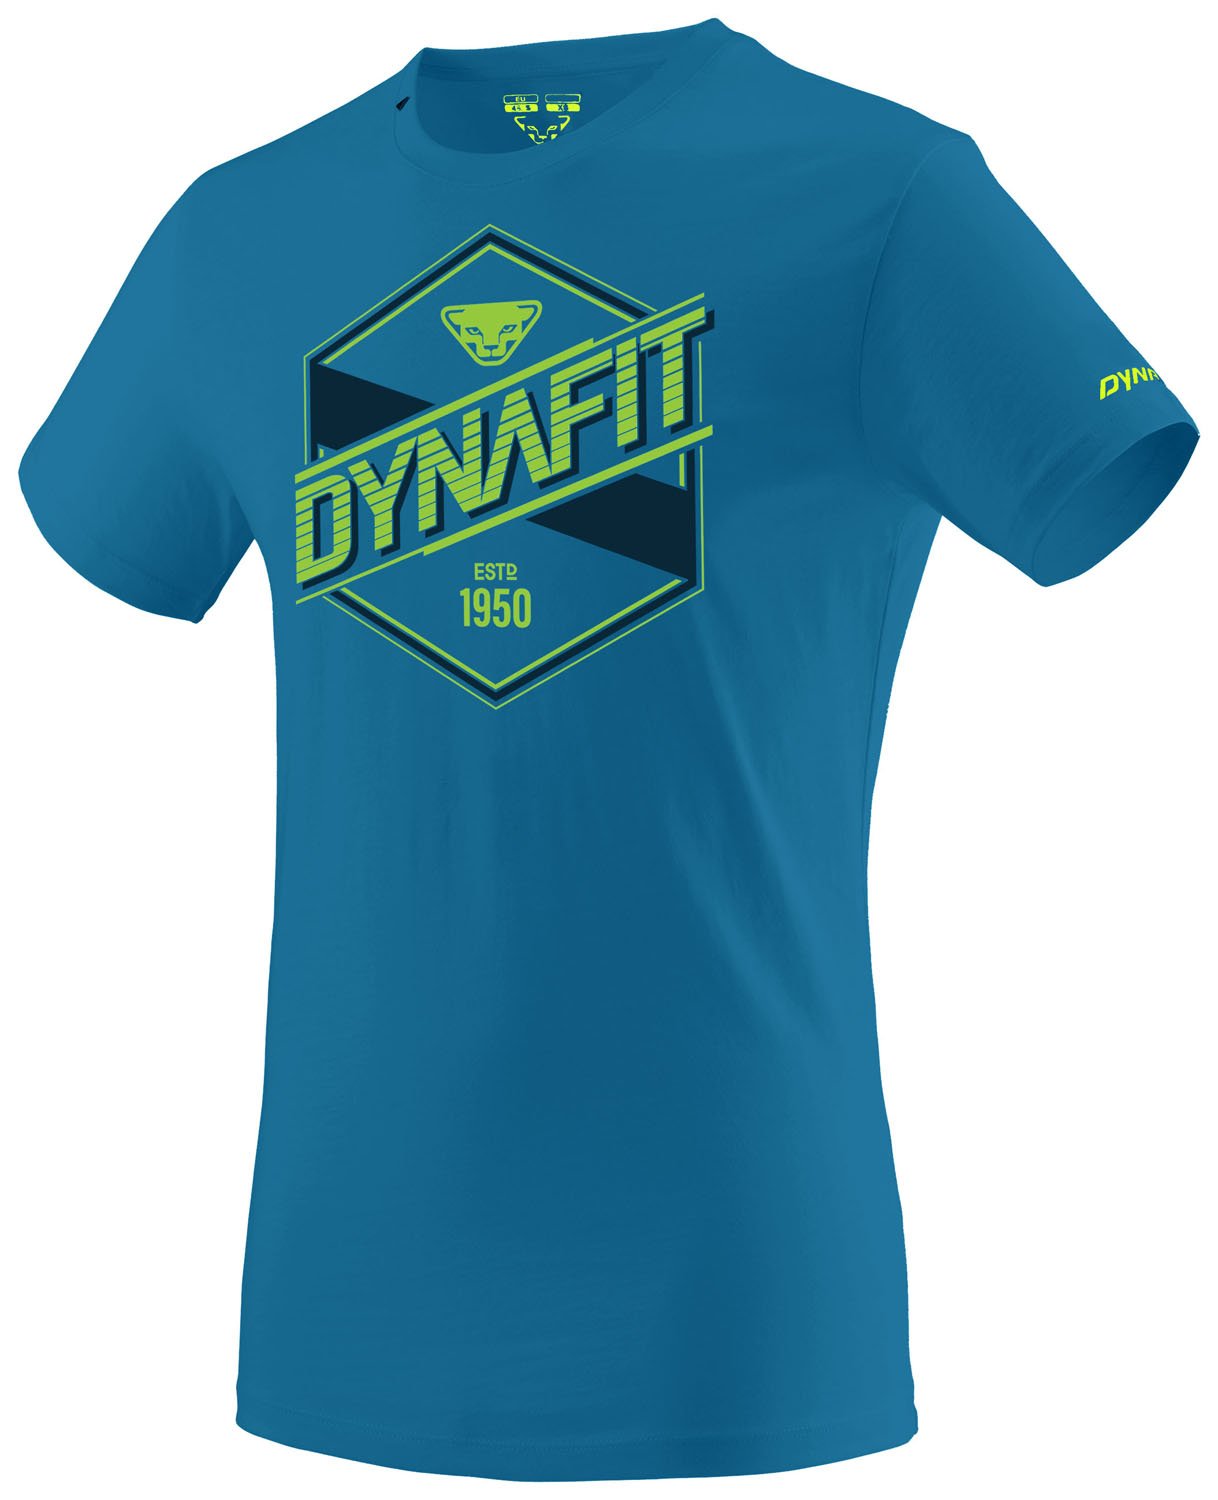 Dynafit Graphic CO M S/S Tee